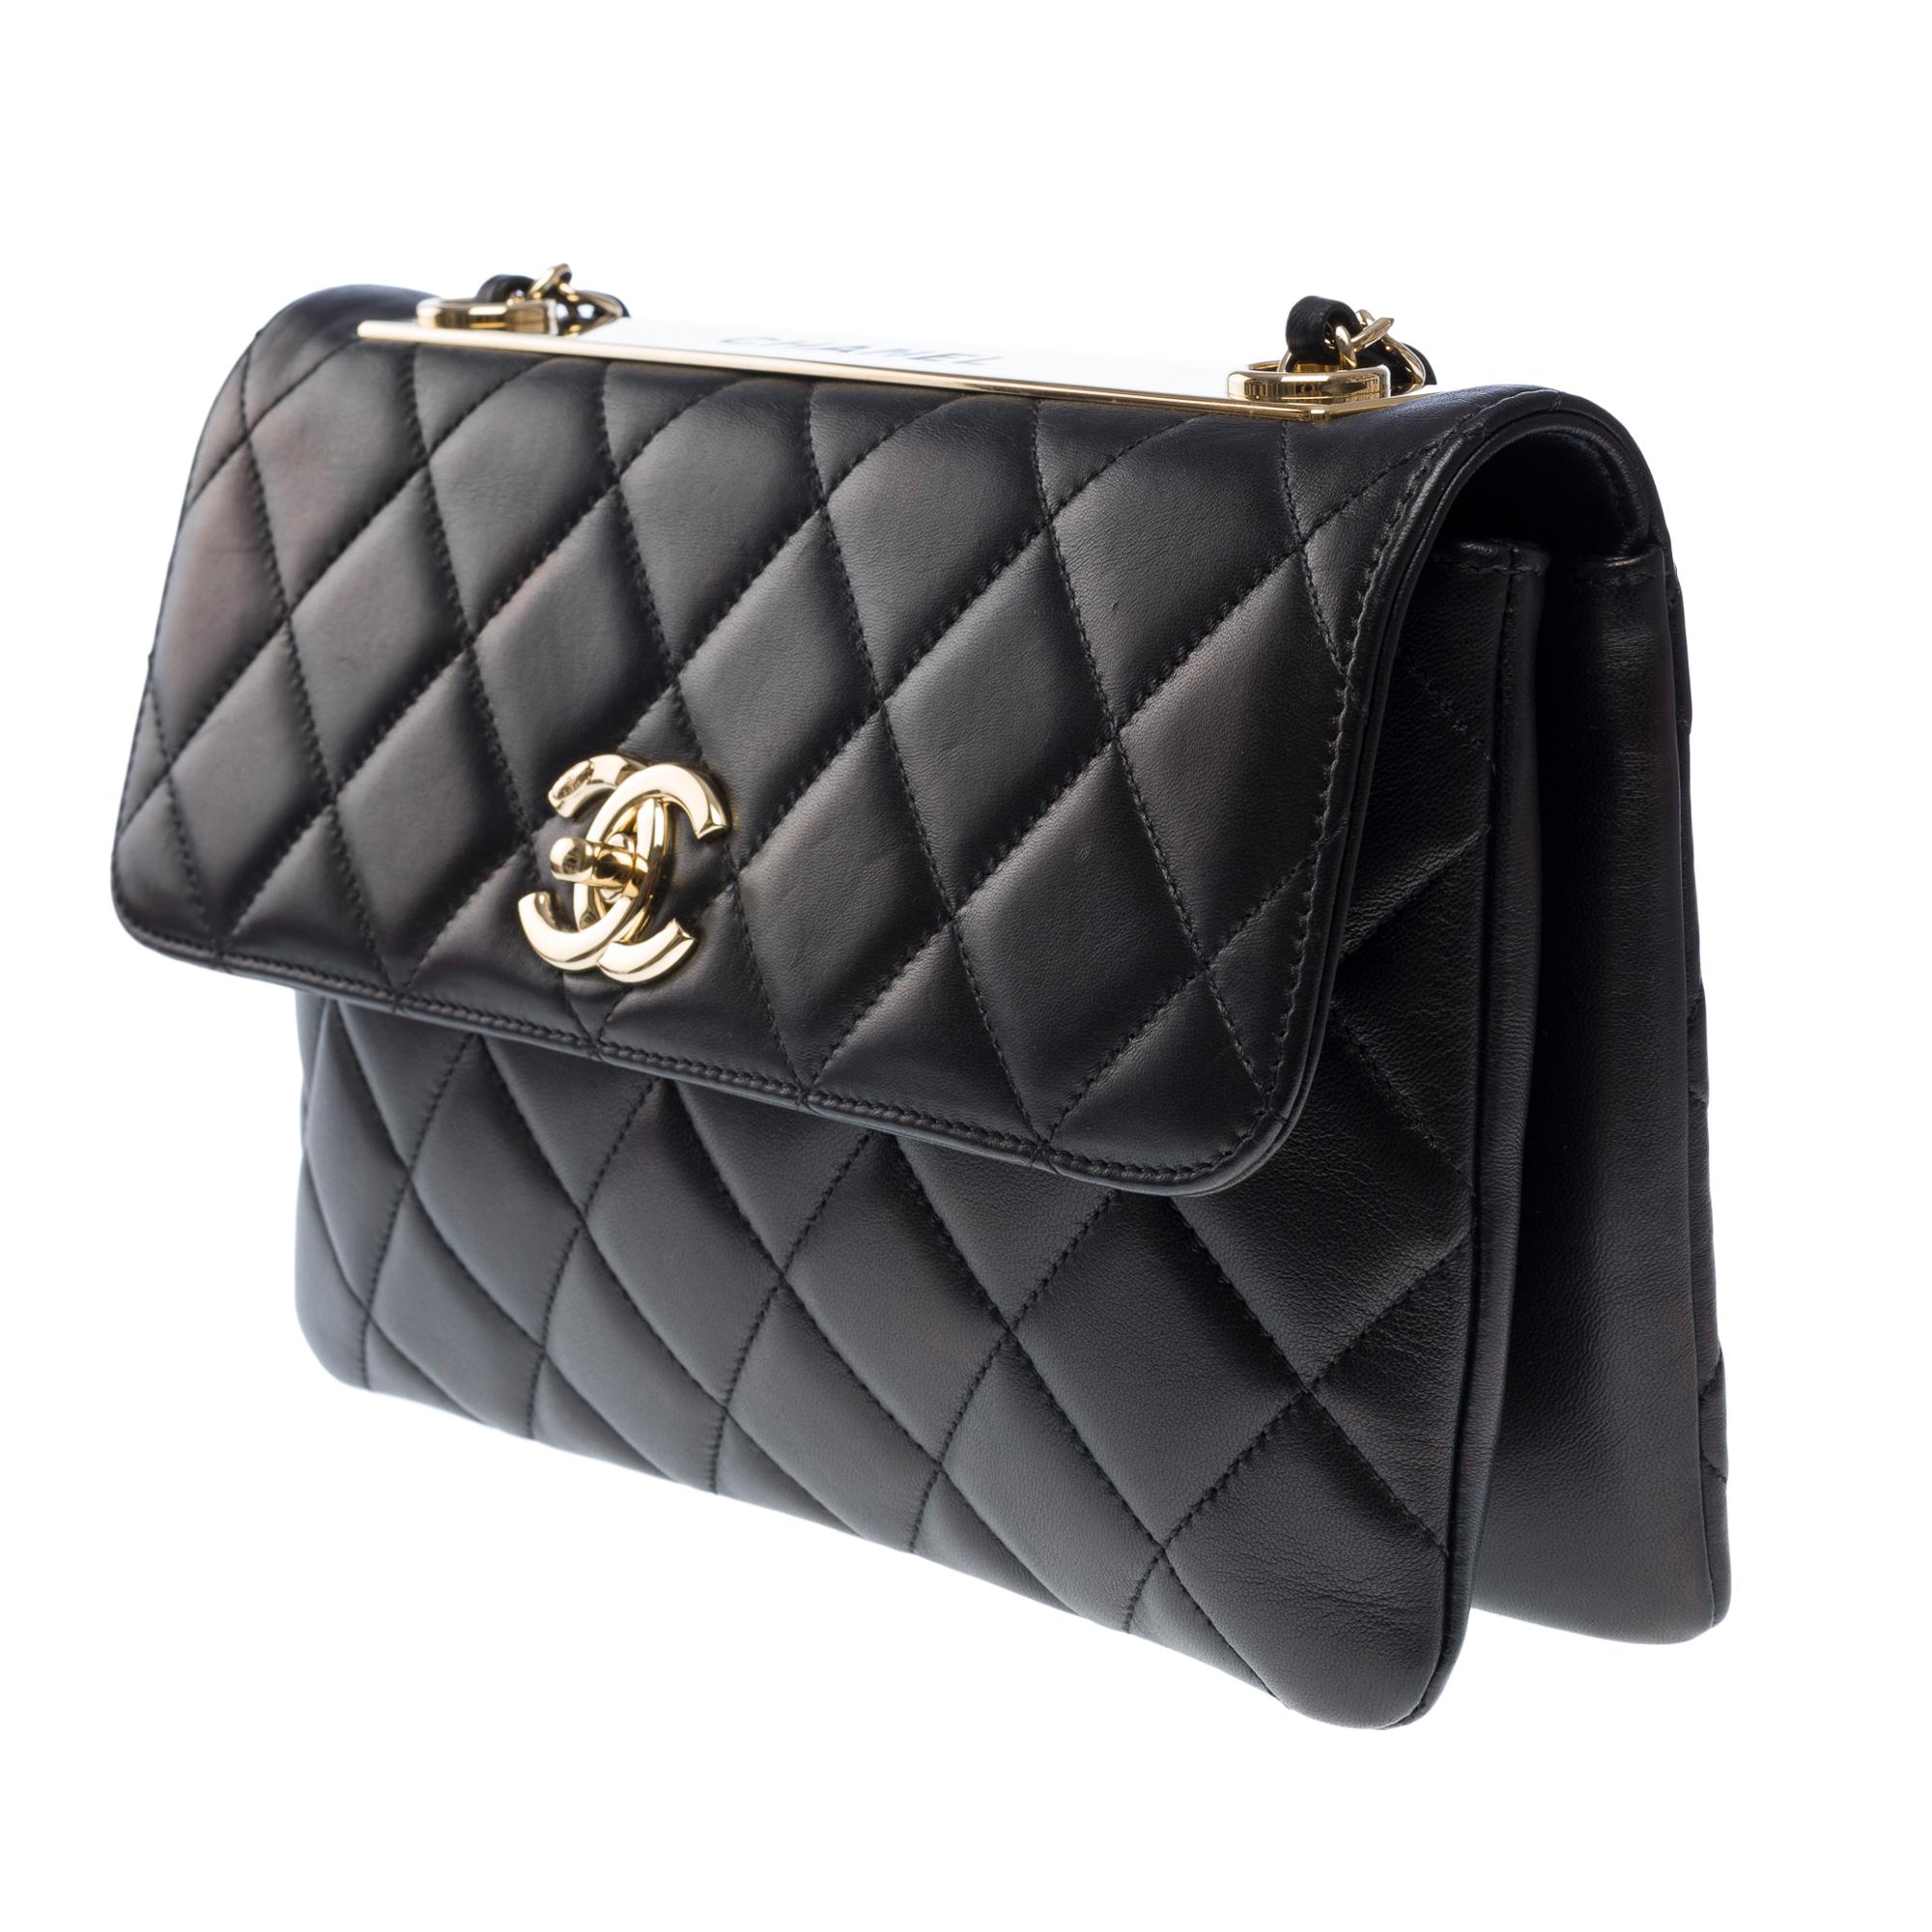 Rare Chanel Timeless/Classic Coco Trendy CC shoulder bag in black leather, GHW  For Sale 1